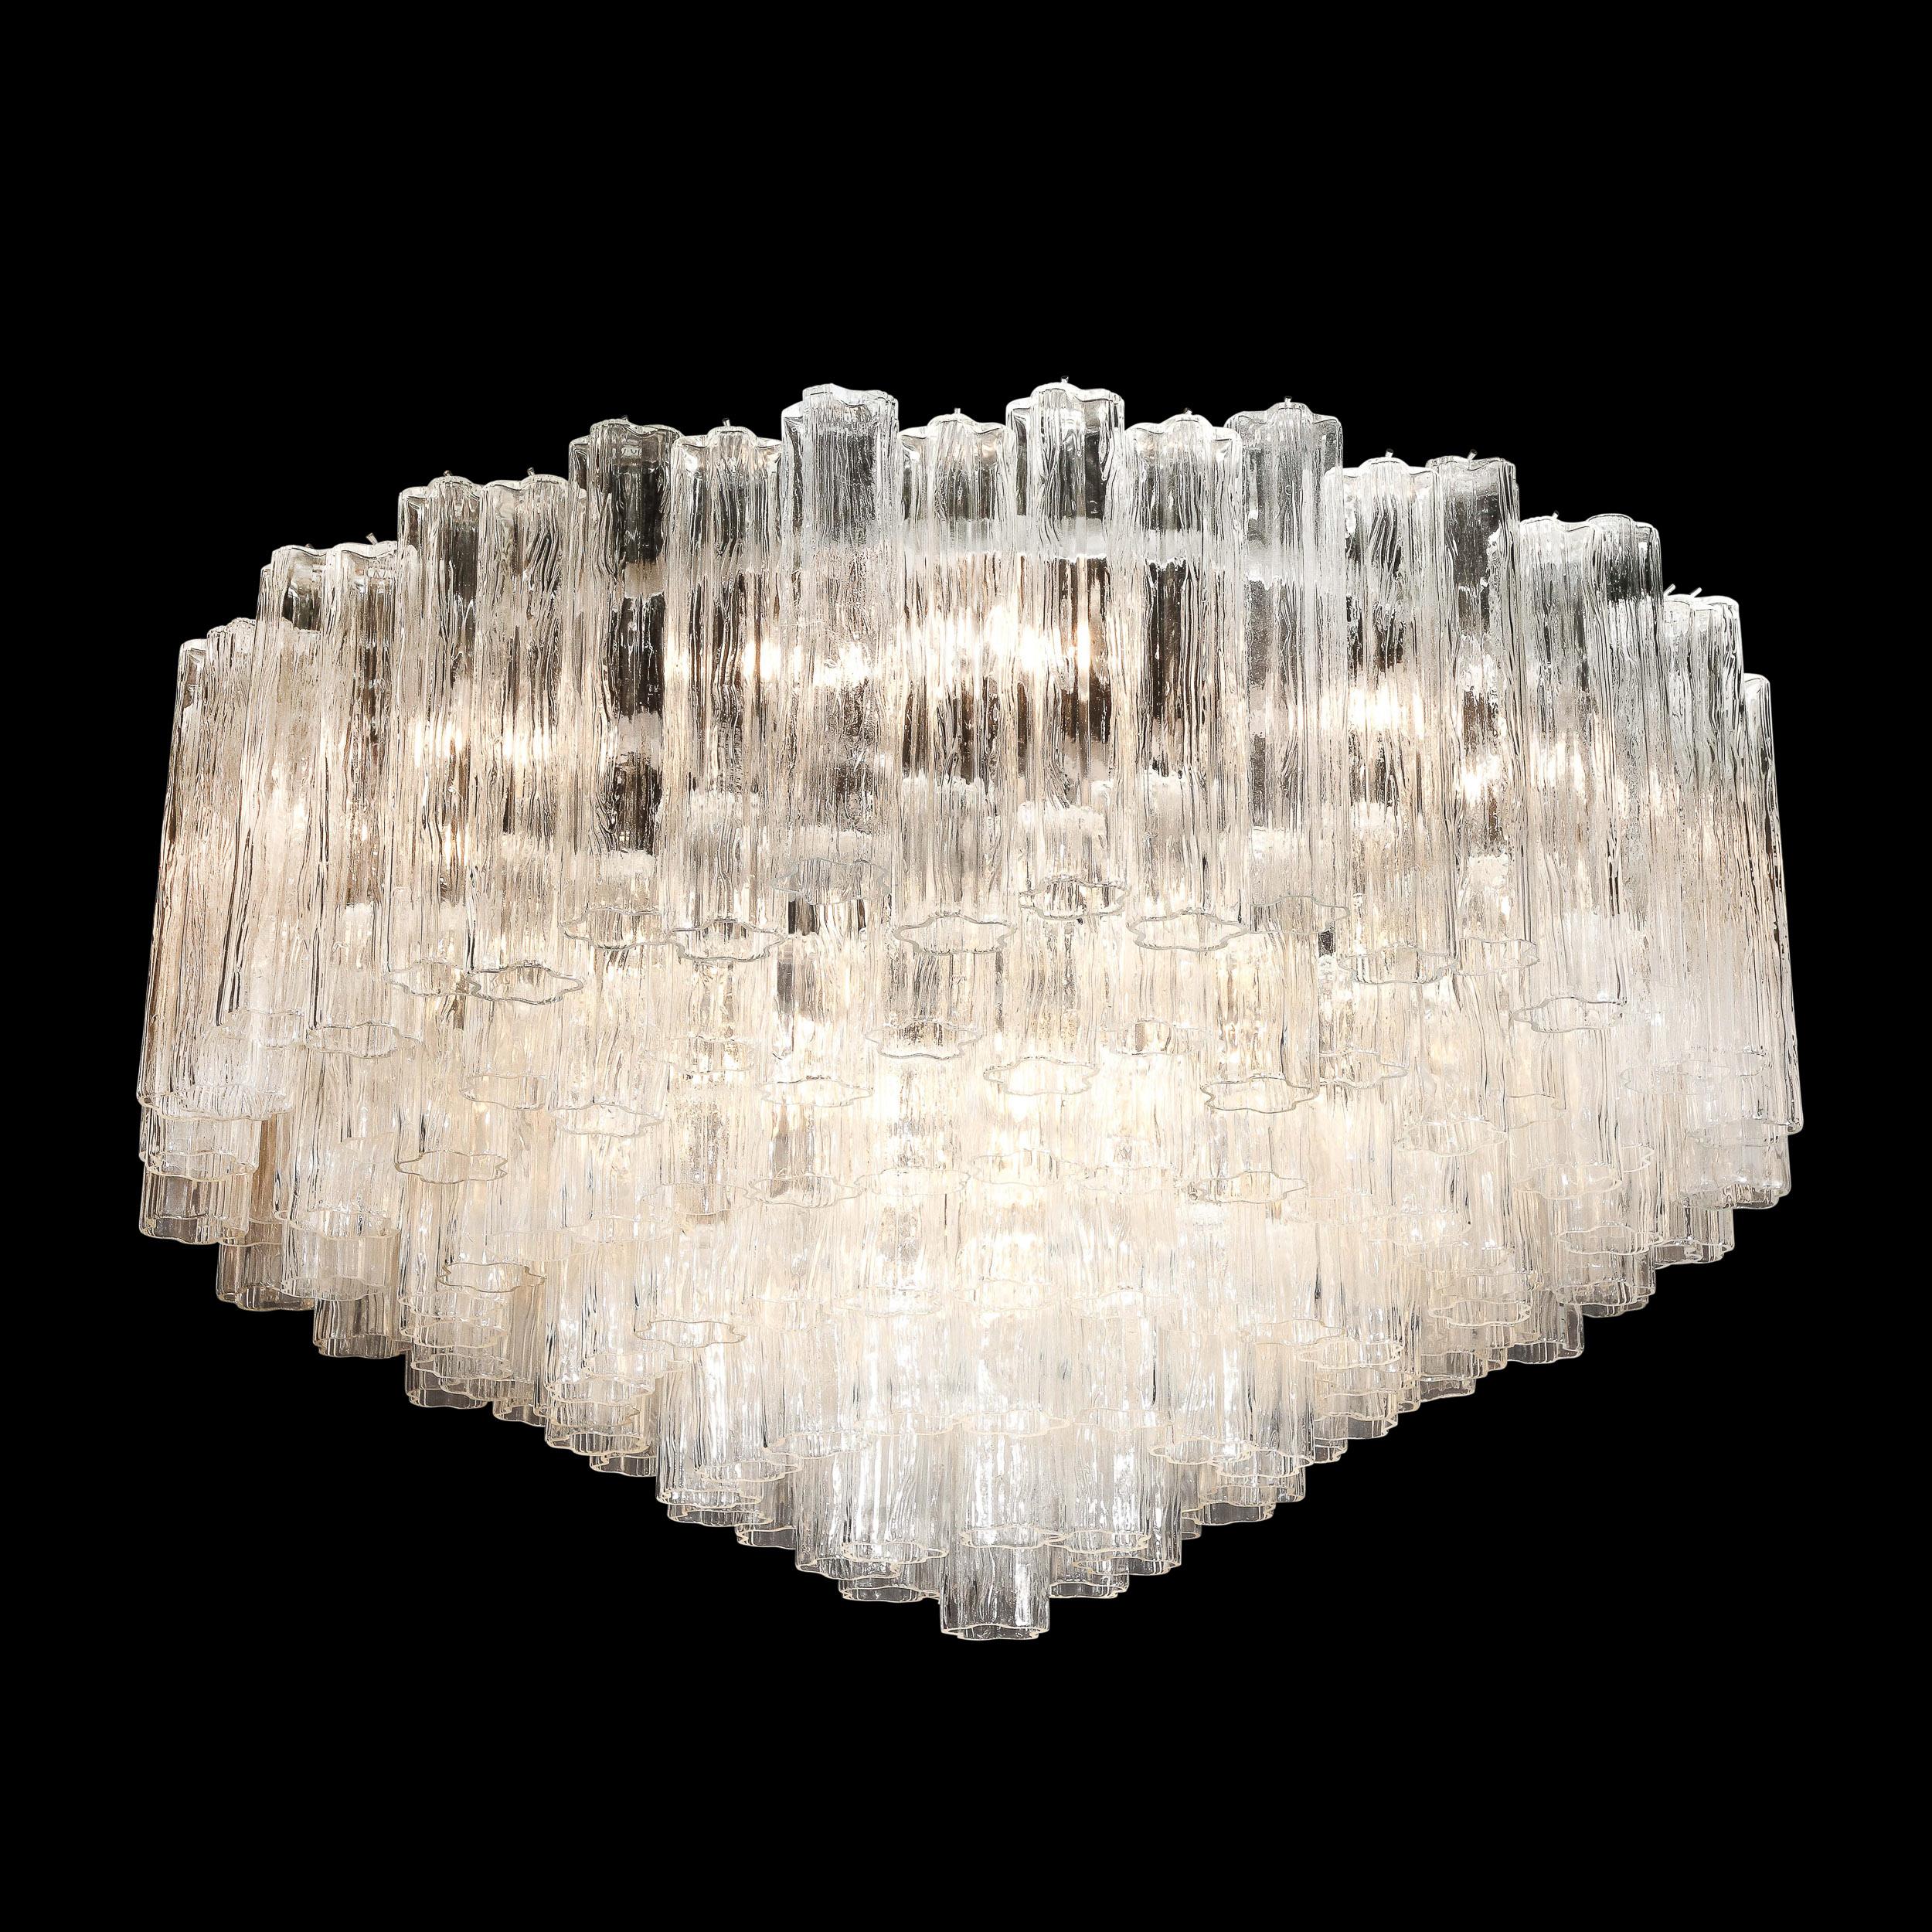 This refined and large scale modernist tronchi chandelier was realized in Murano, Italy- the island off the coast of Venice renowned for centuries for its superlative glass production. It features seven tiers of Murano tronchi crystals- one of the